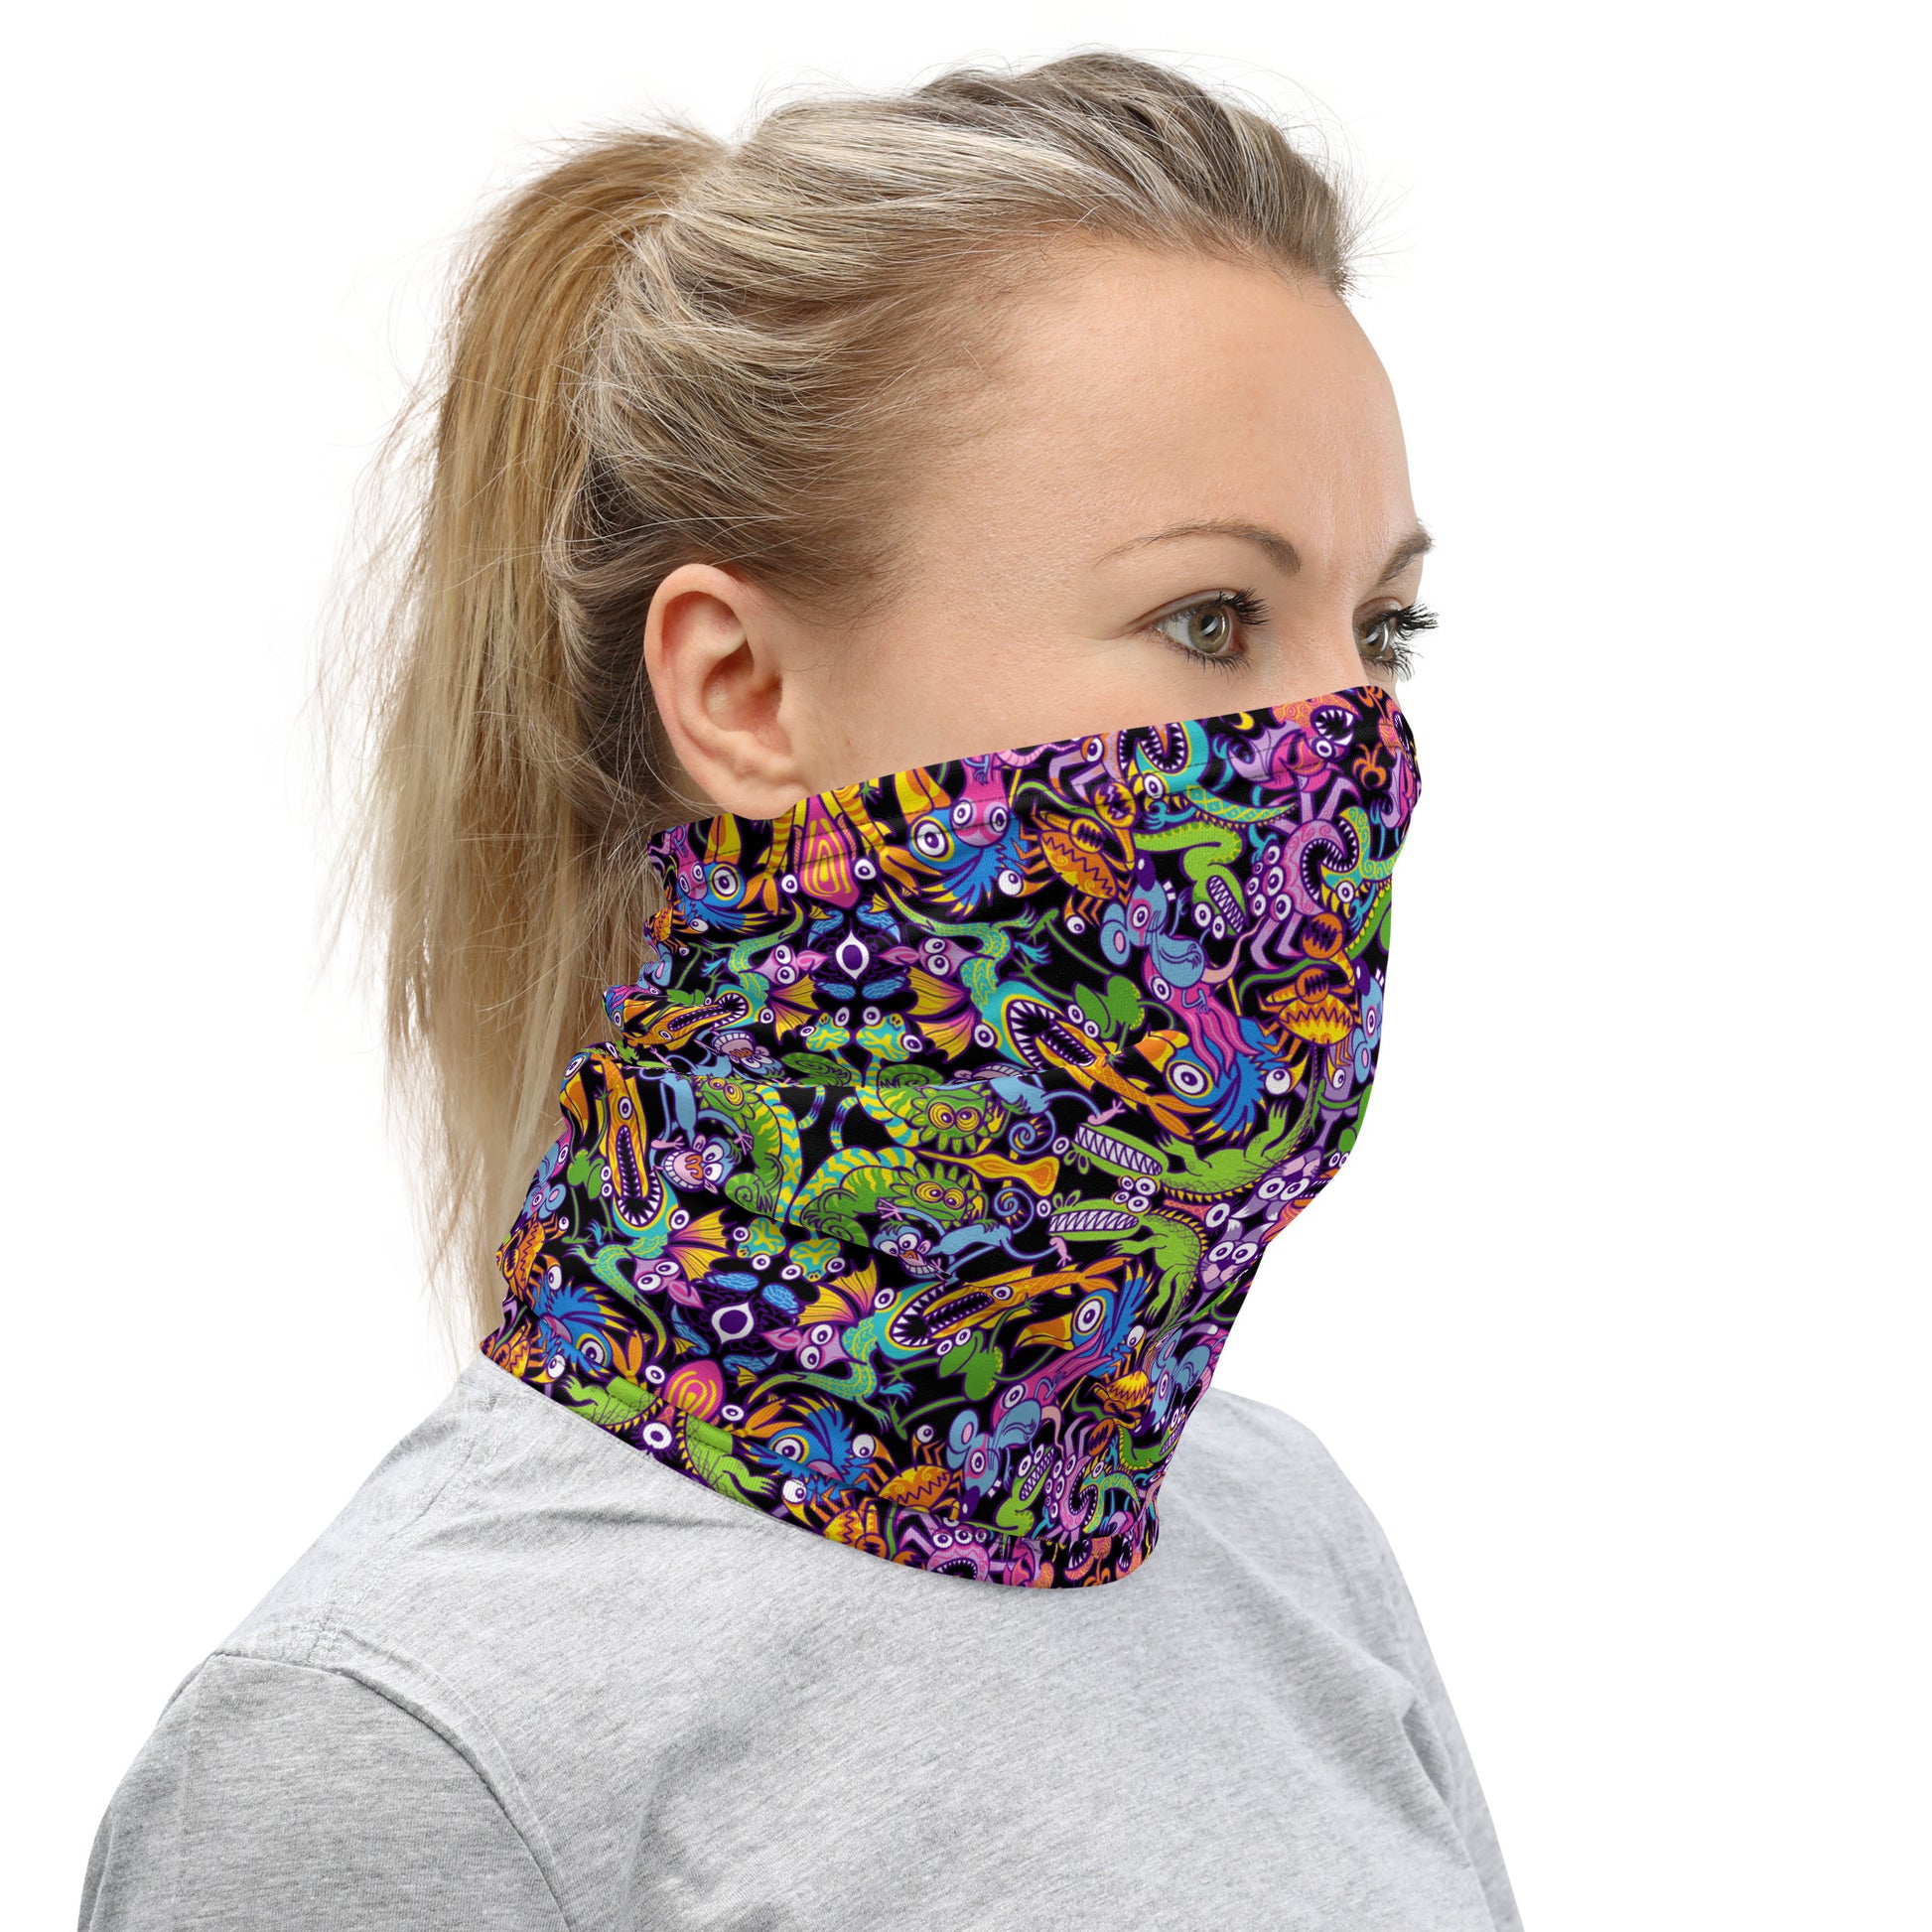 Eccentric critters in a lively crazy festival Neck Gaiter. Neck warmer